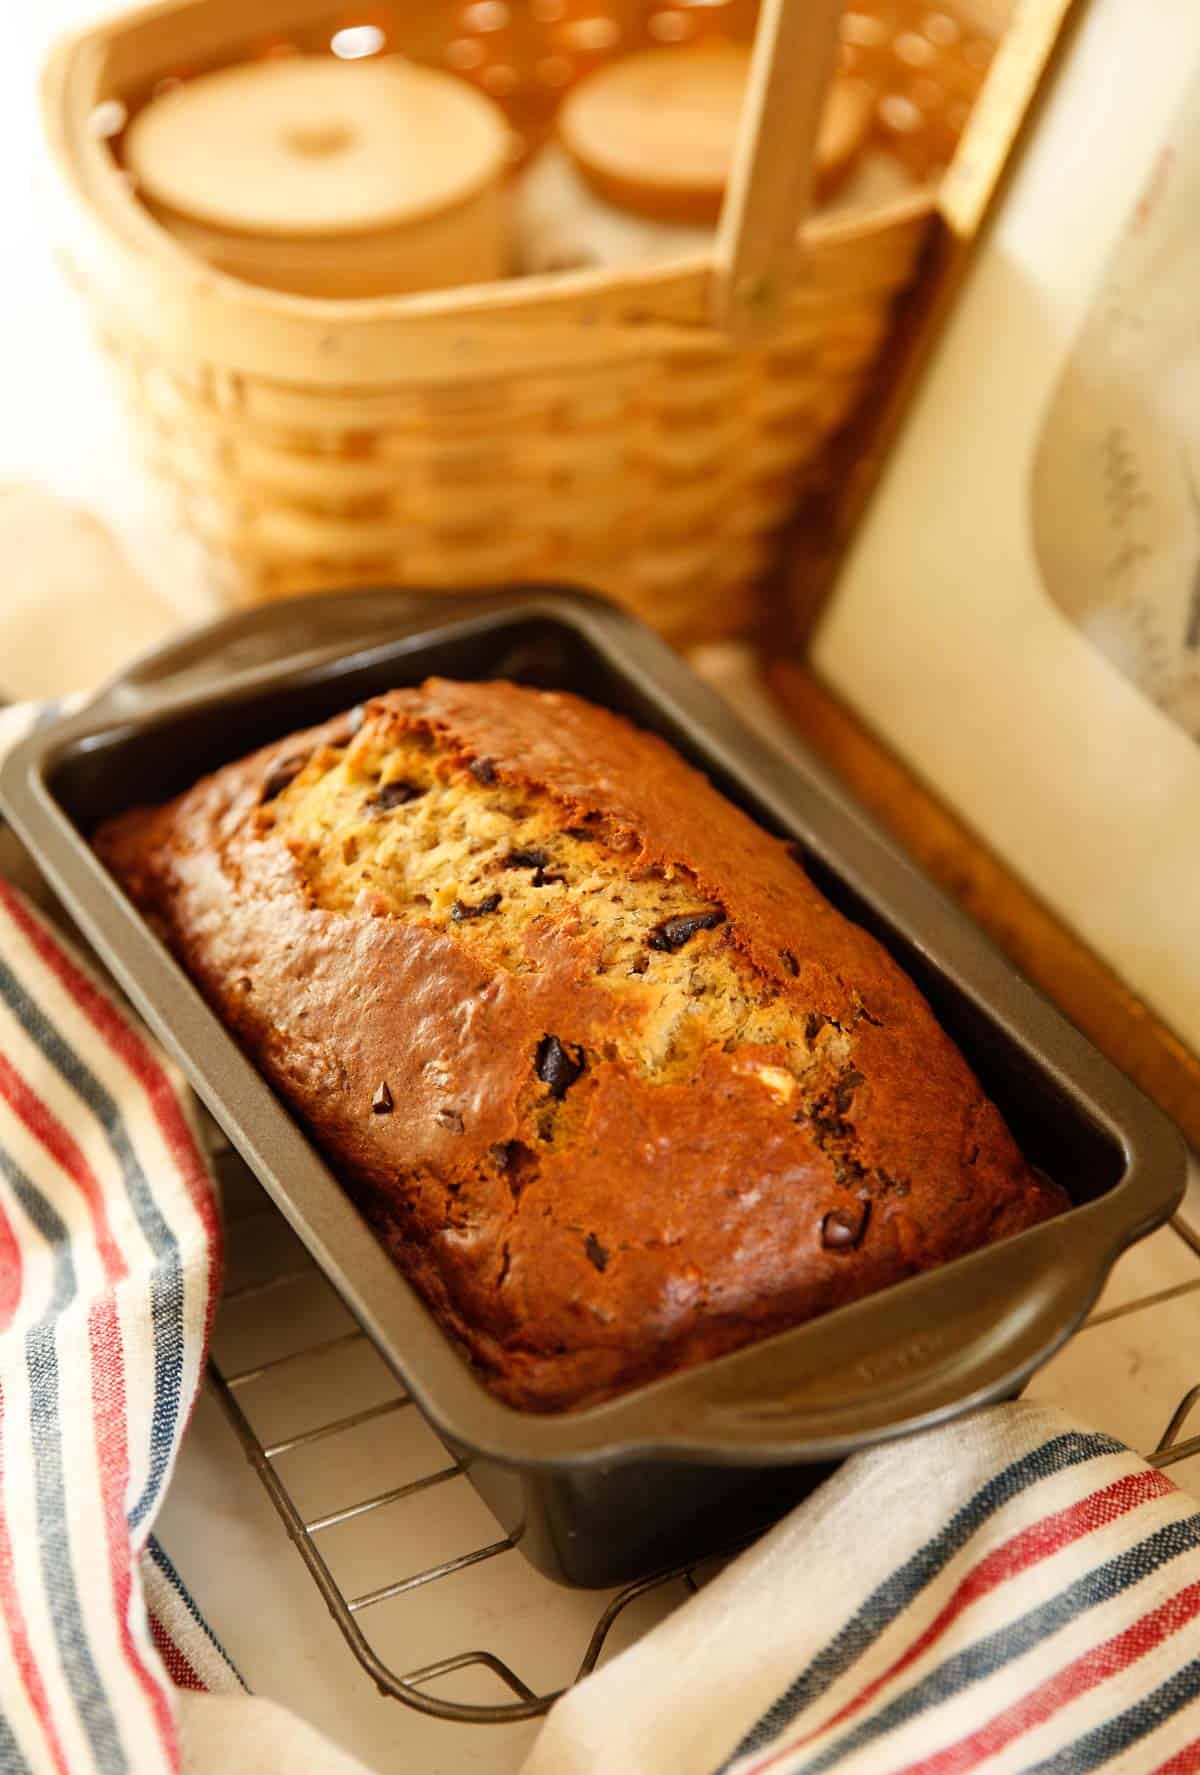 Banana Bread in a Loaf Pan Cooling 